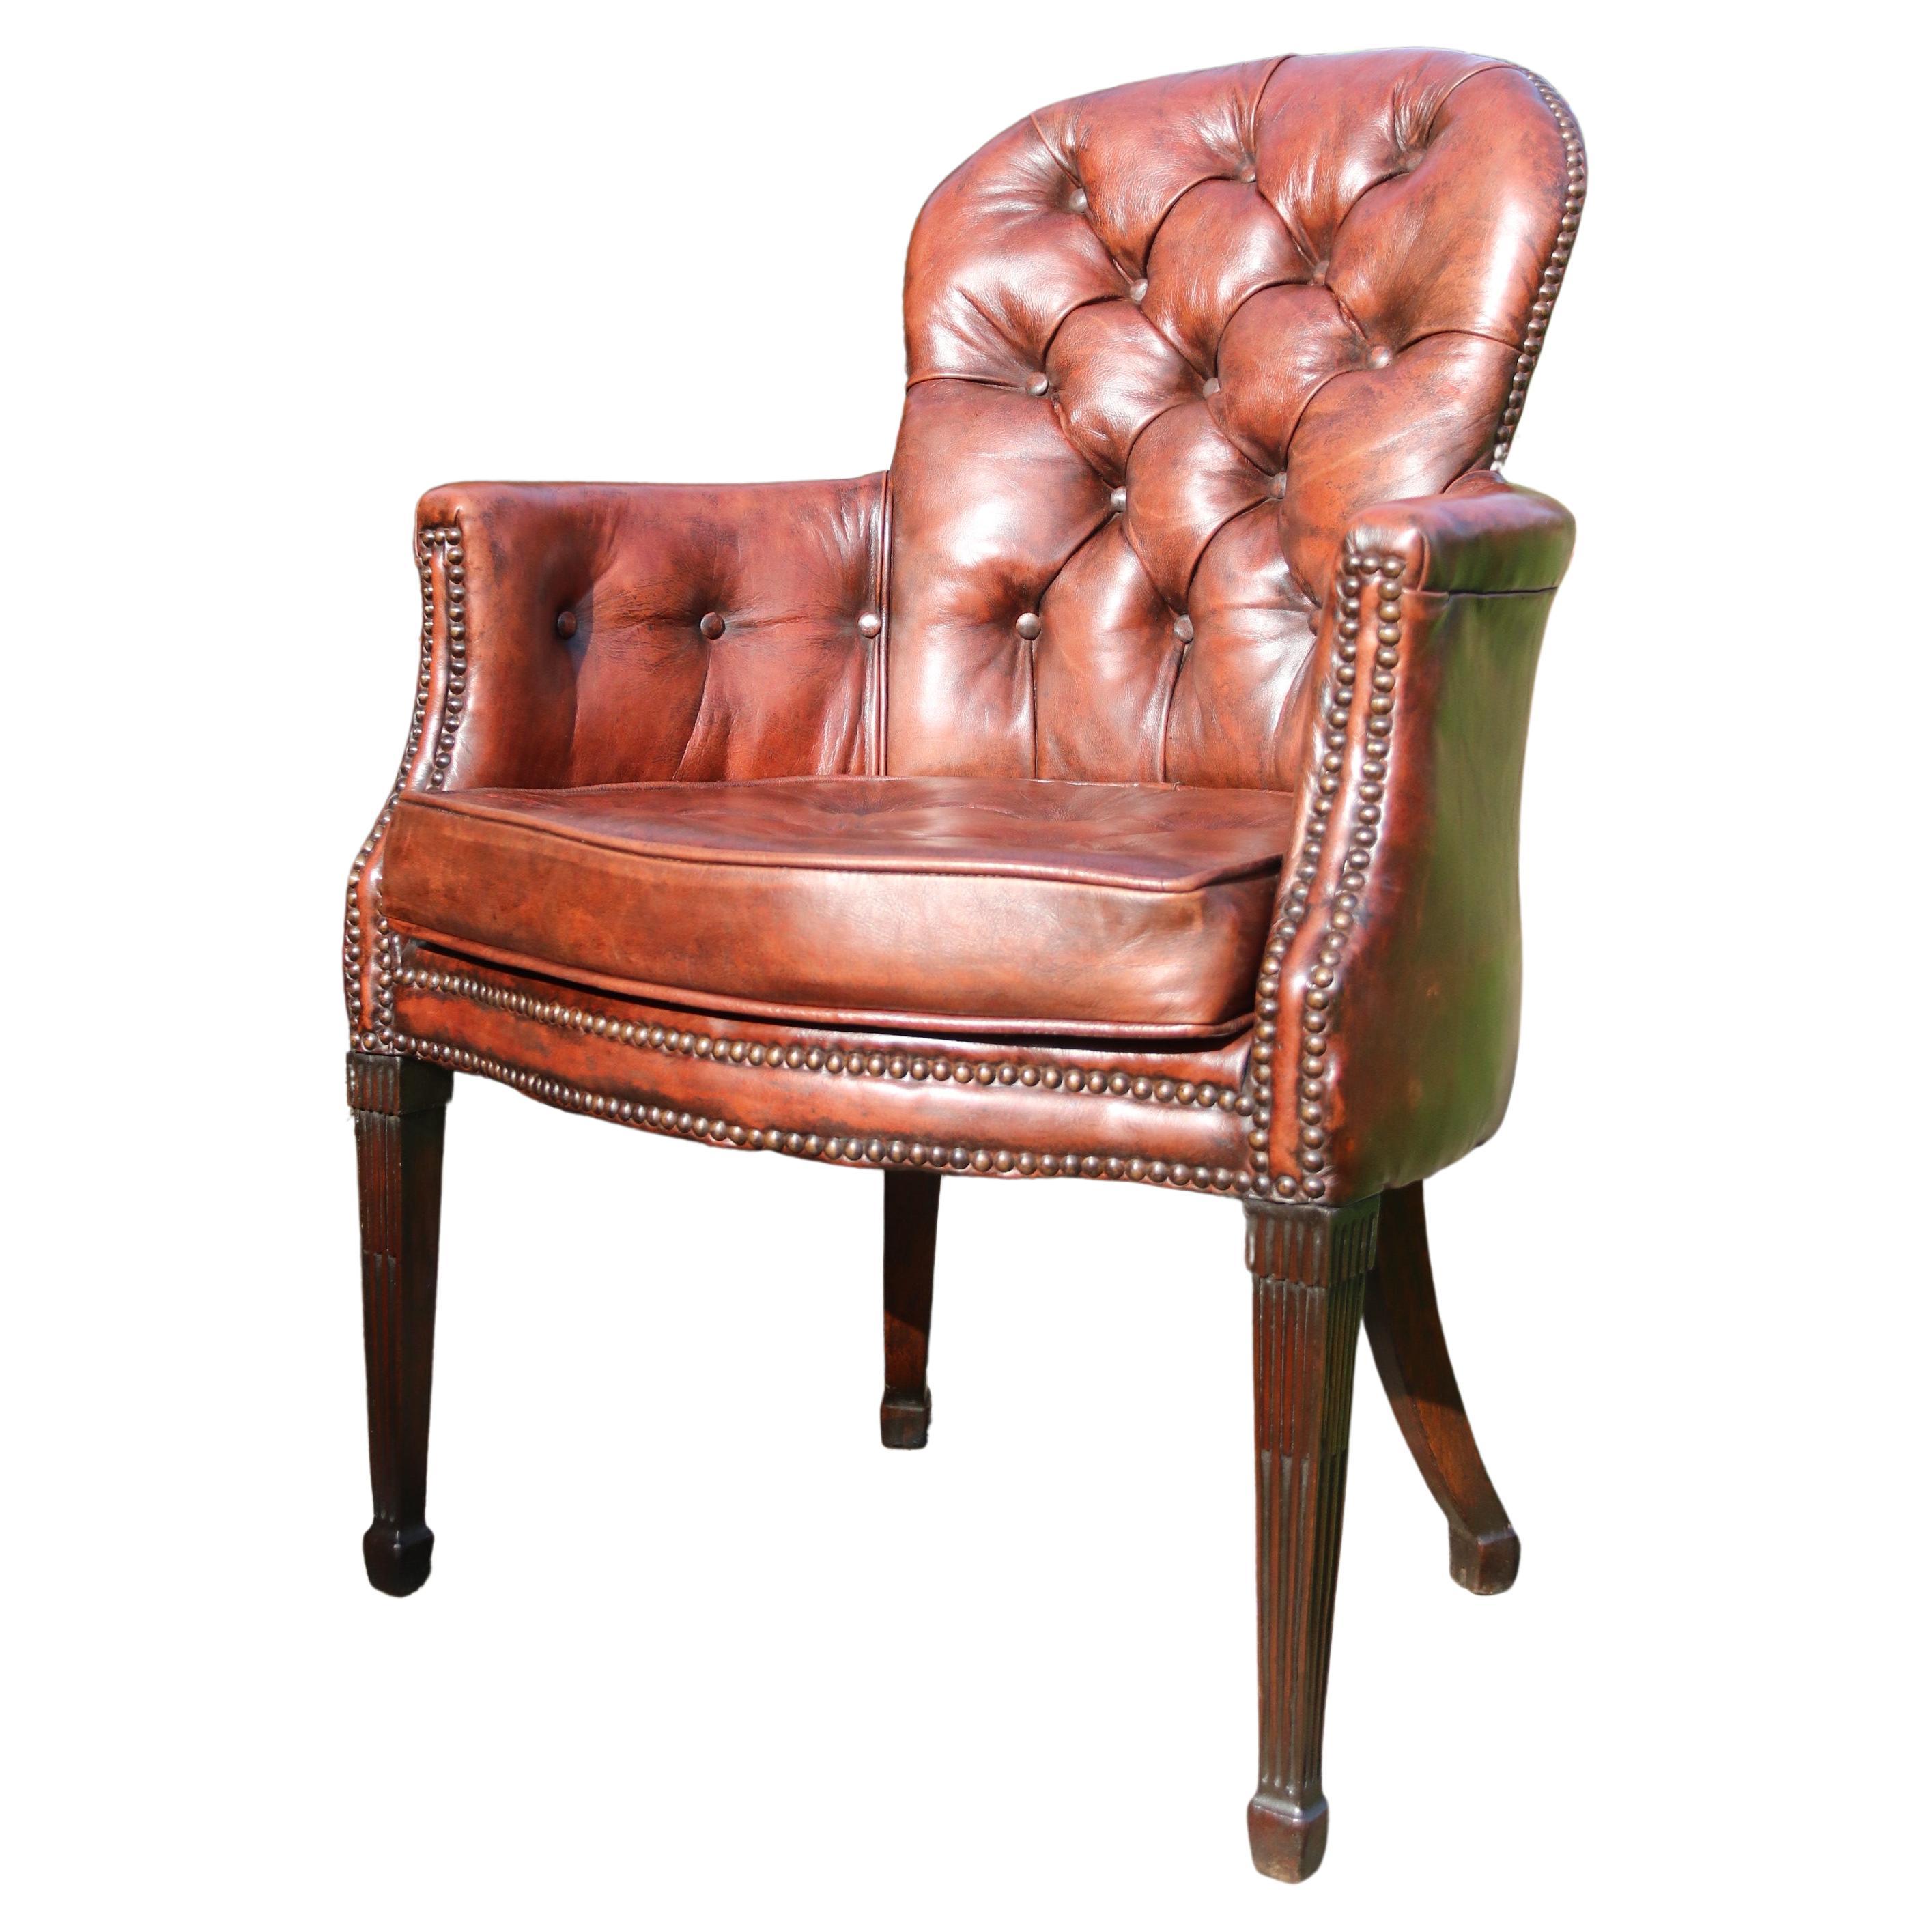 English 18th century leather armchair circa 1790 For Sale